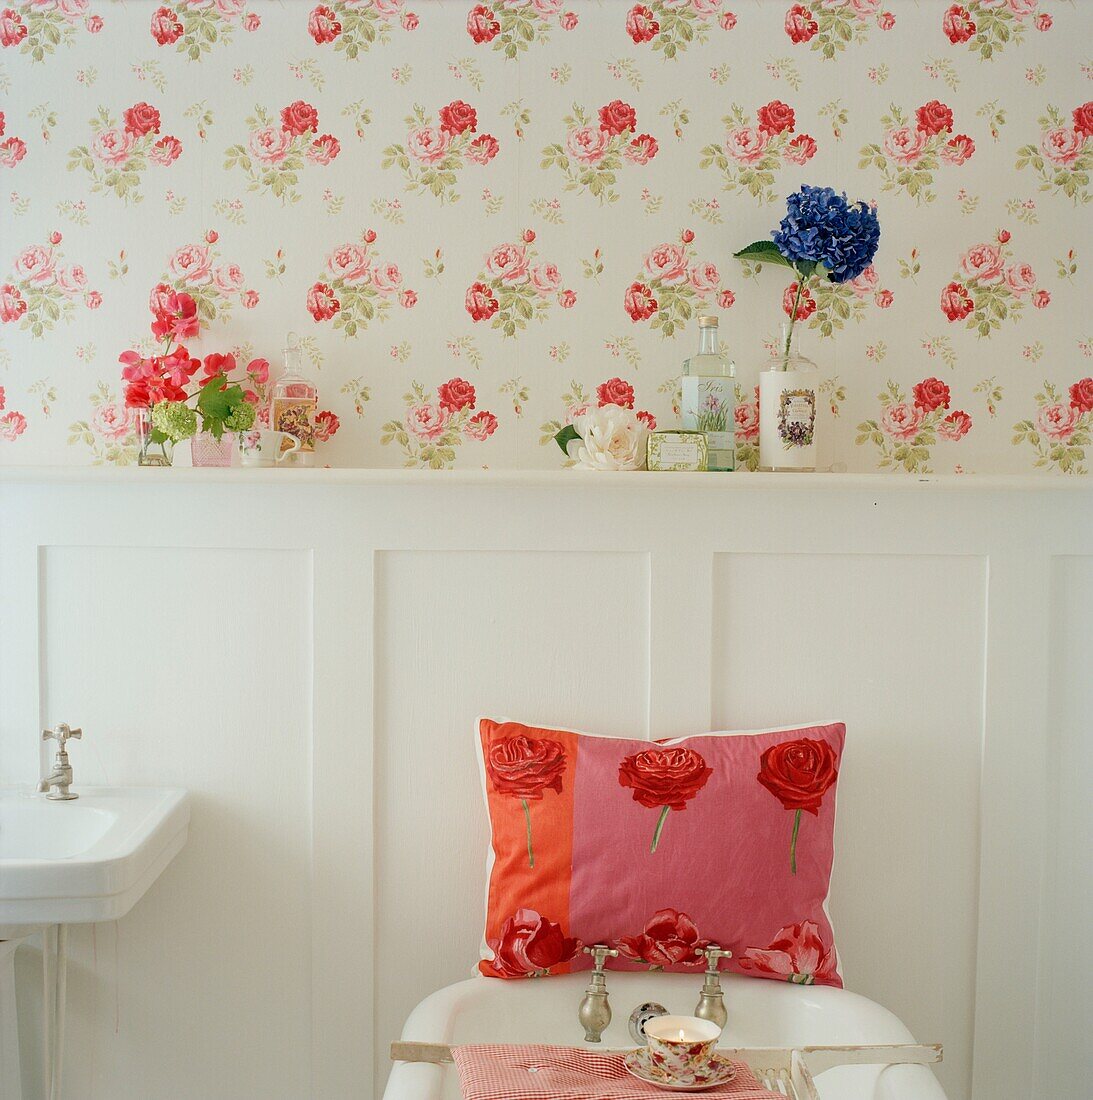 Cushion in bathroom with panelled wall and floral patterned wallpaper